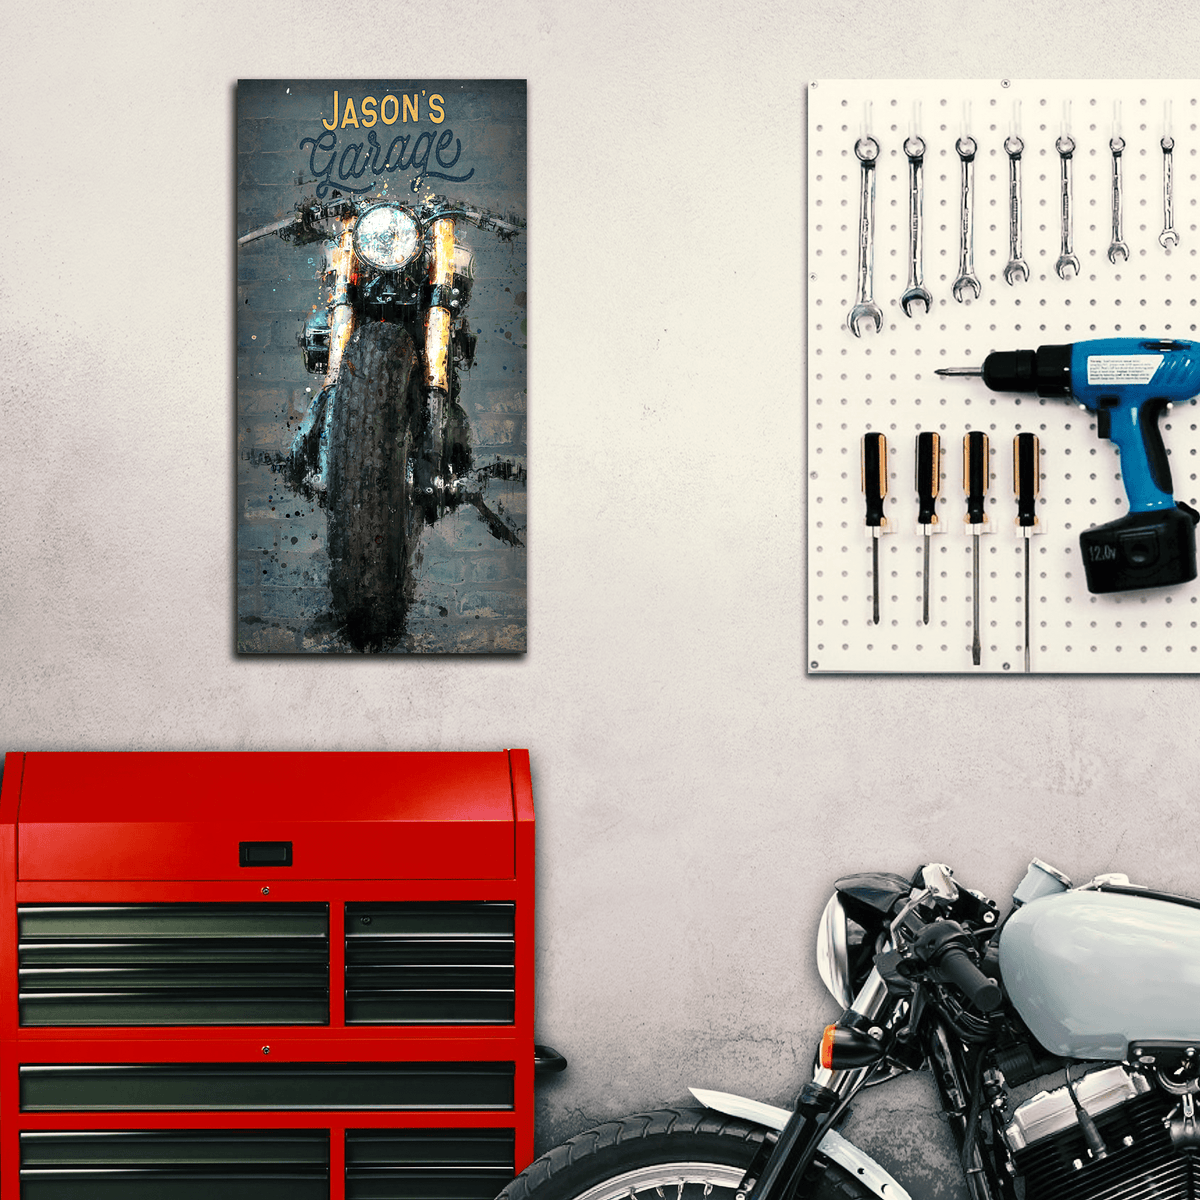 Personalized motorcycle gift from Personal-Prints